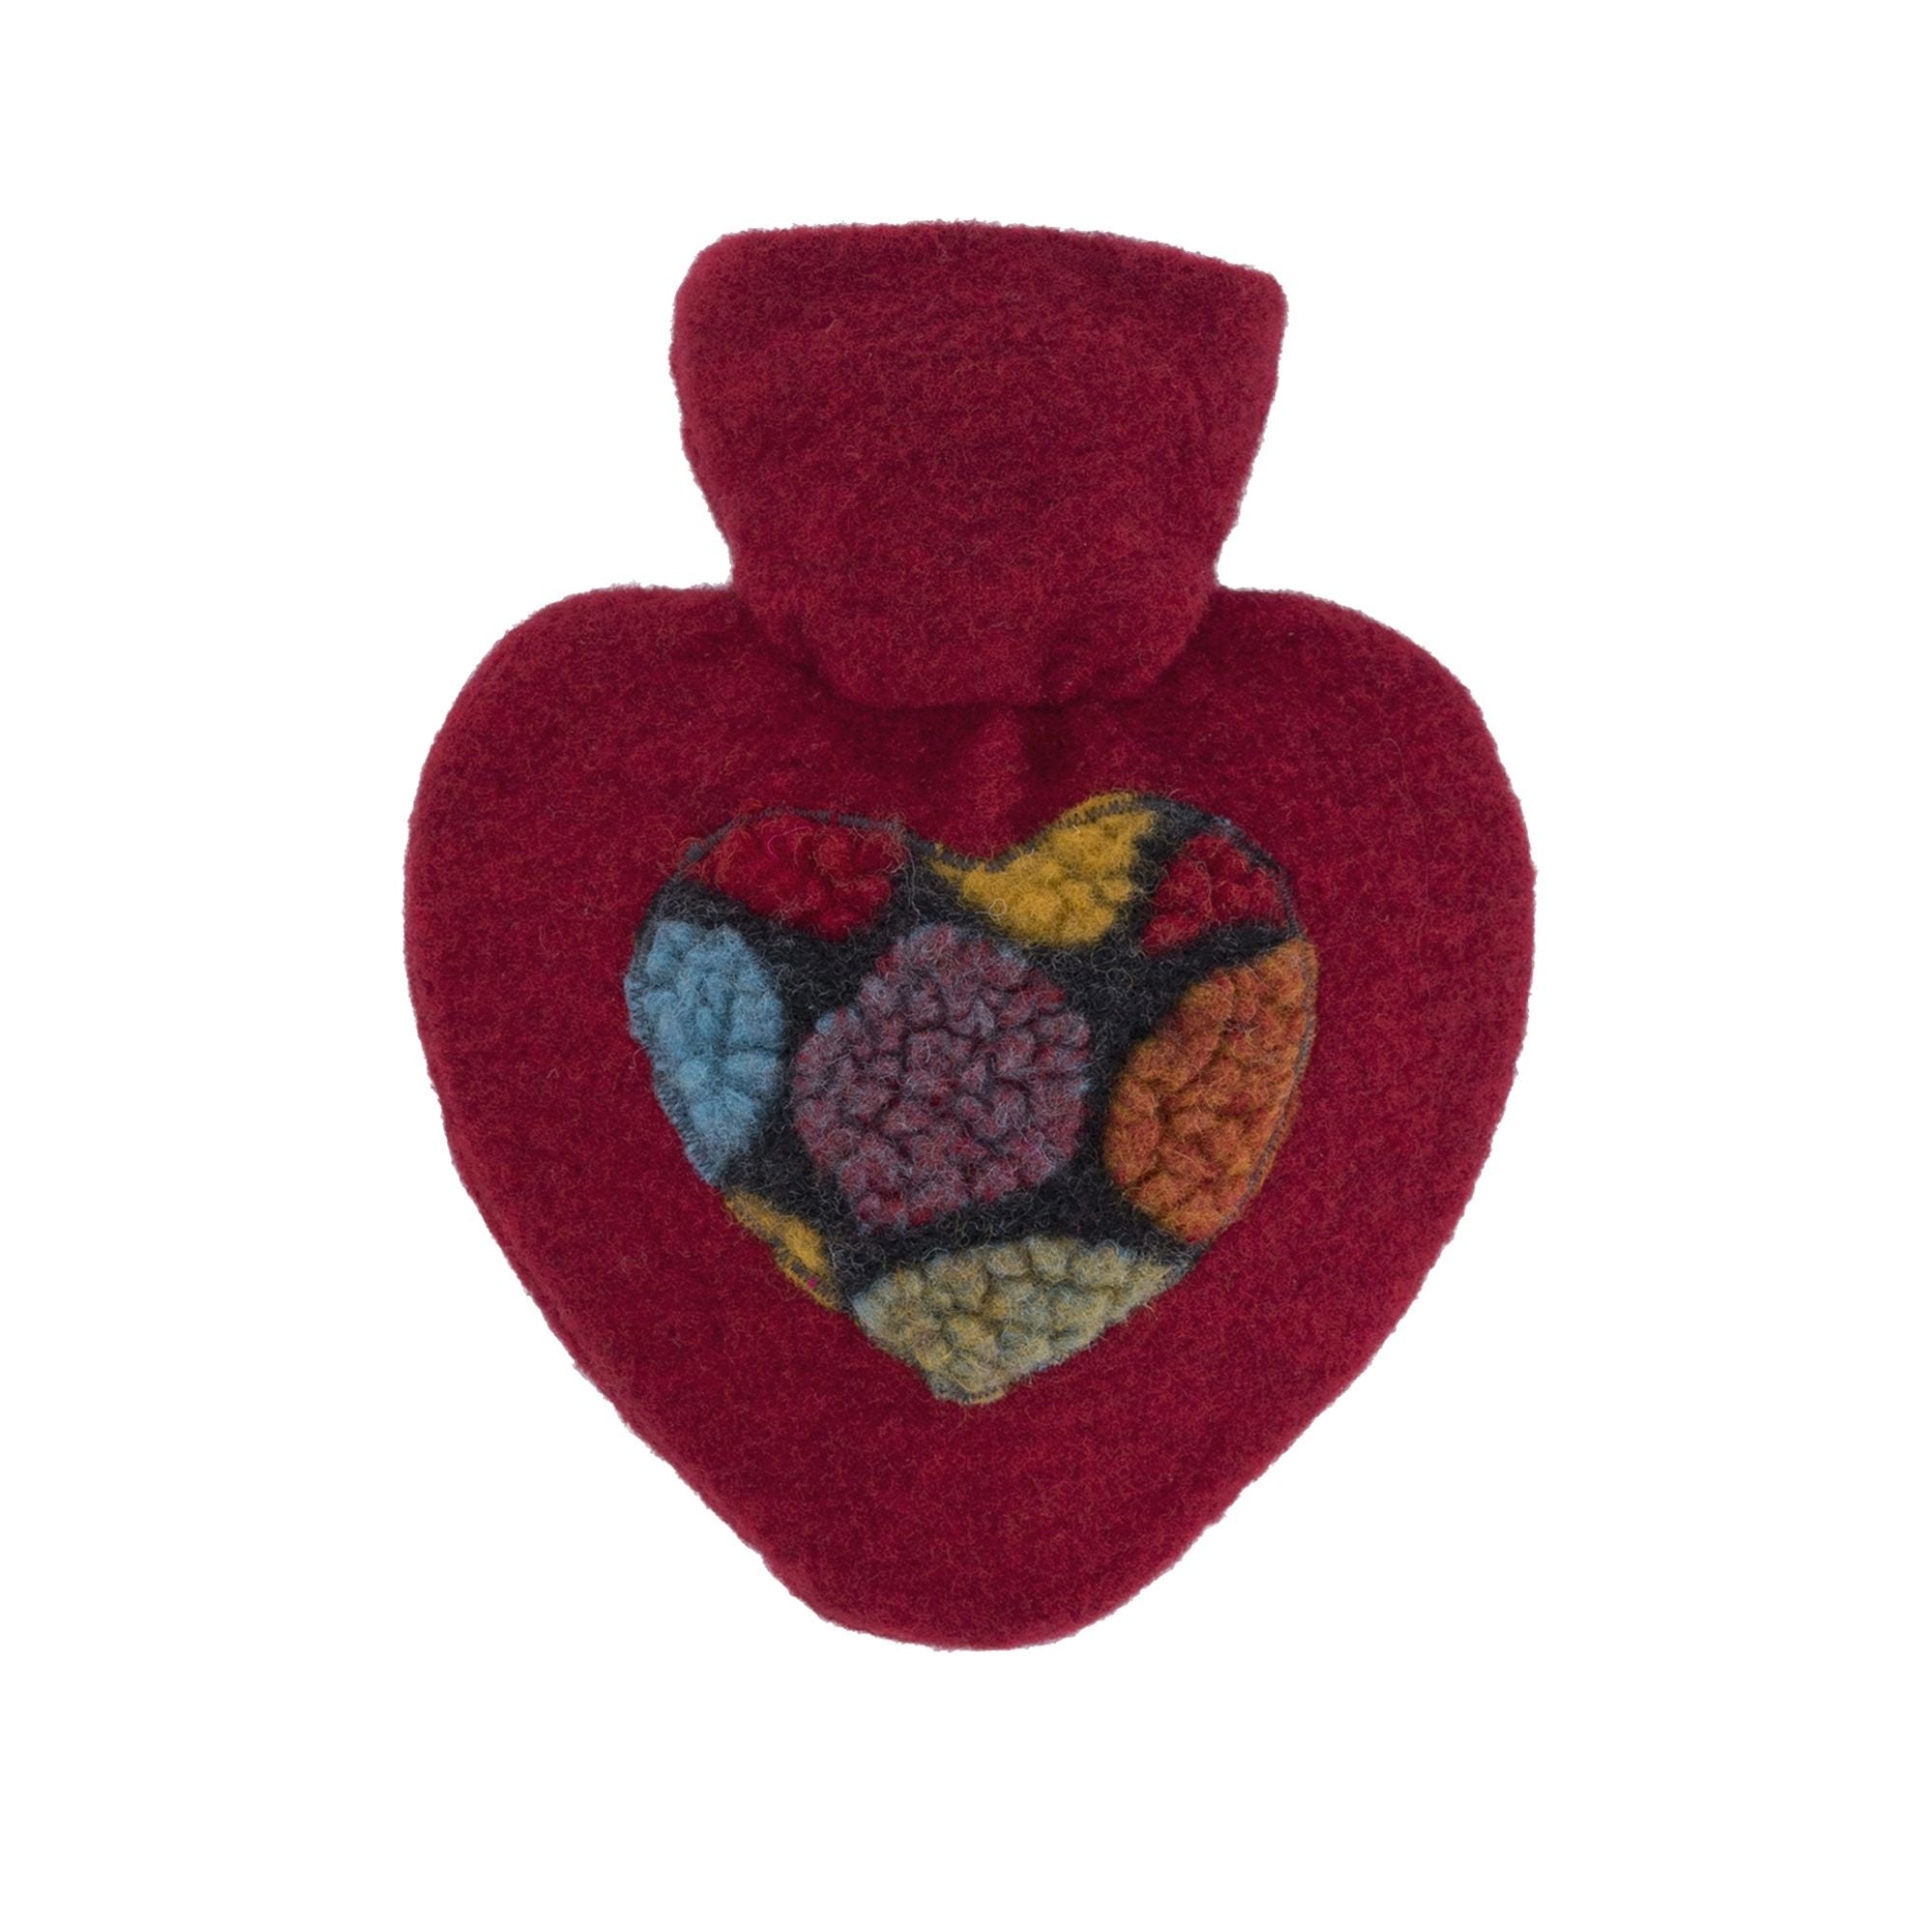 1 Litre Heart Shaped Hot Water Bottle with Red Knitted Pom Pom Felt Cover (rubberless)